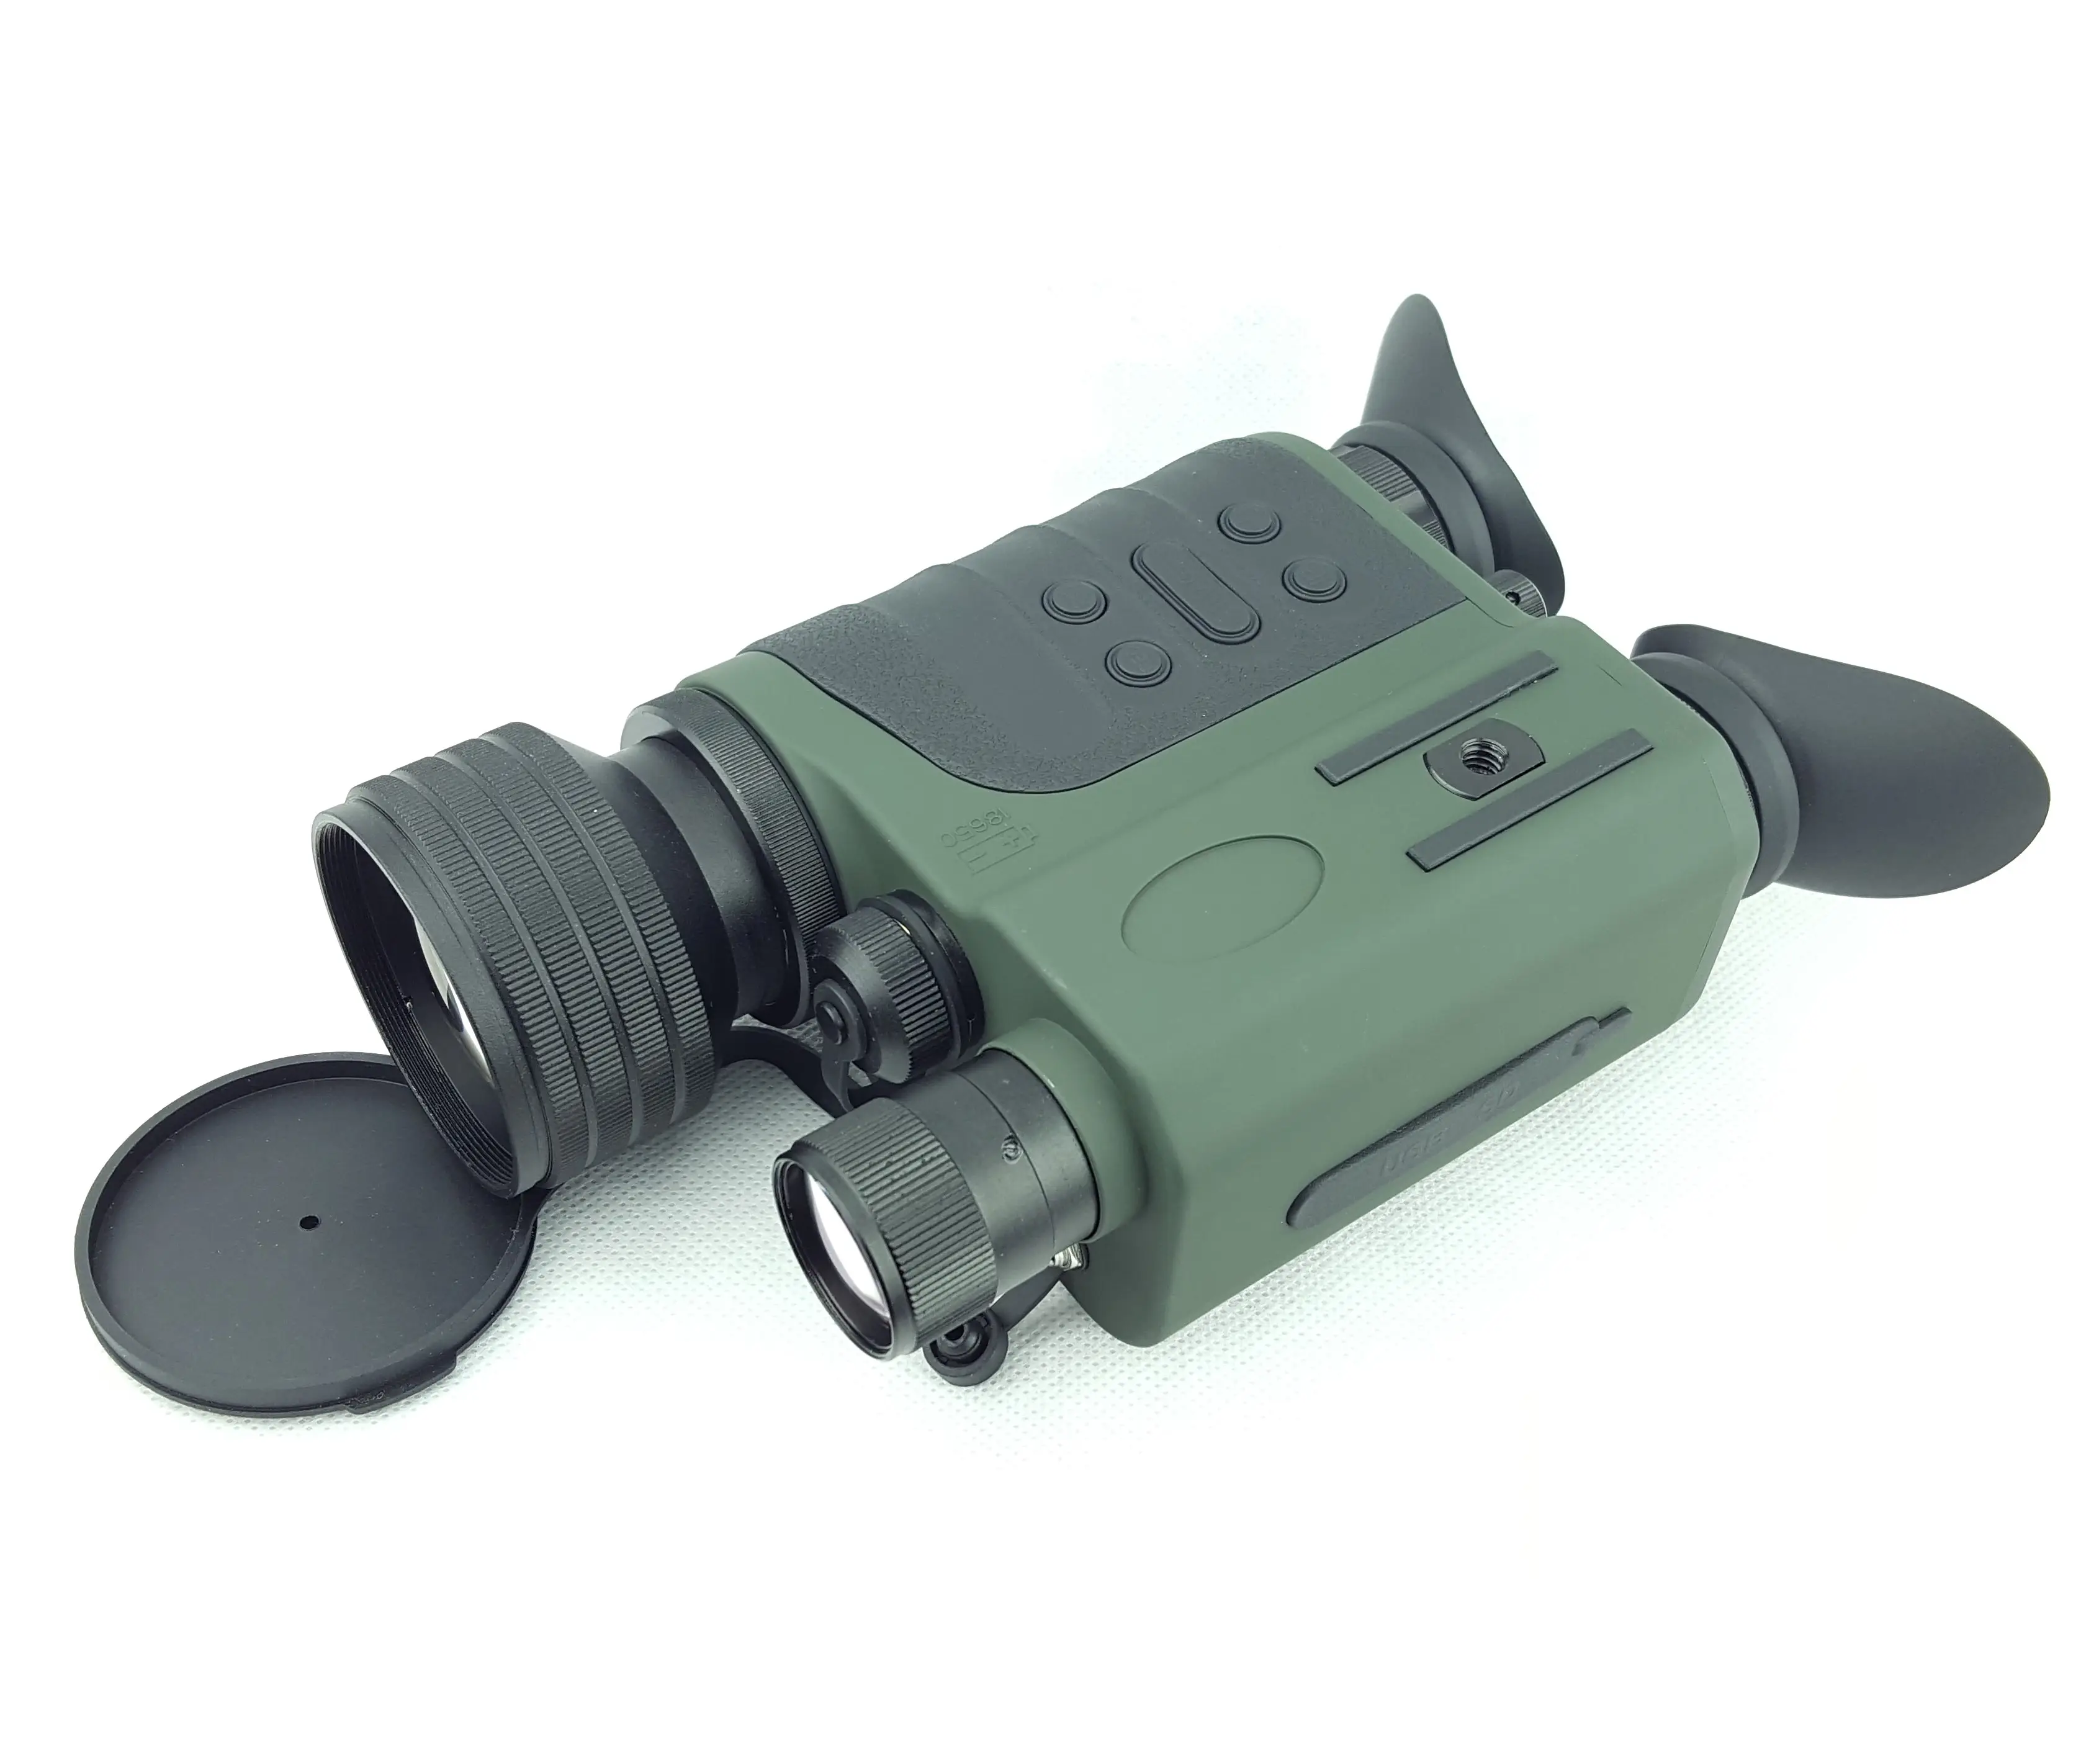 Digital Night Vision Binoculars for Hunting and Outdoor Camping and Other Activities NVD-B02-6-30X50Plus